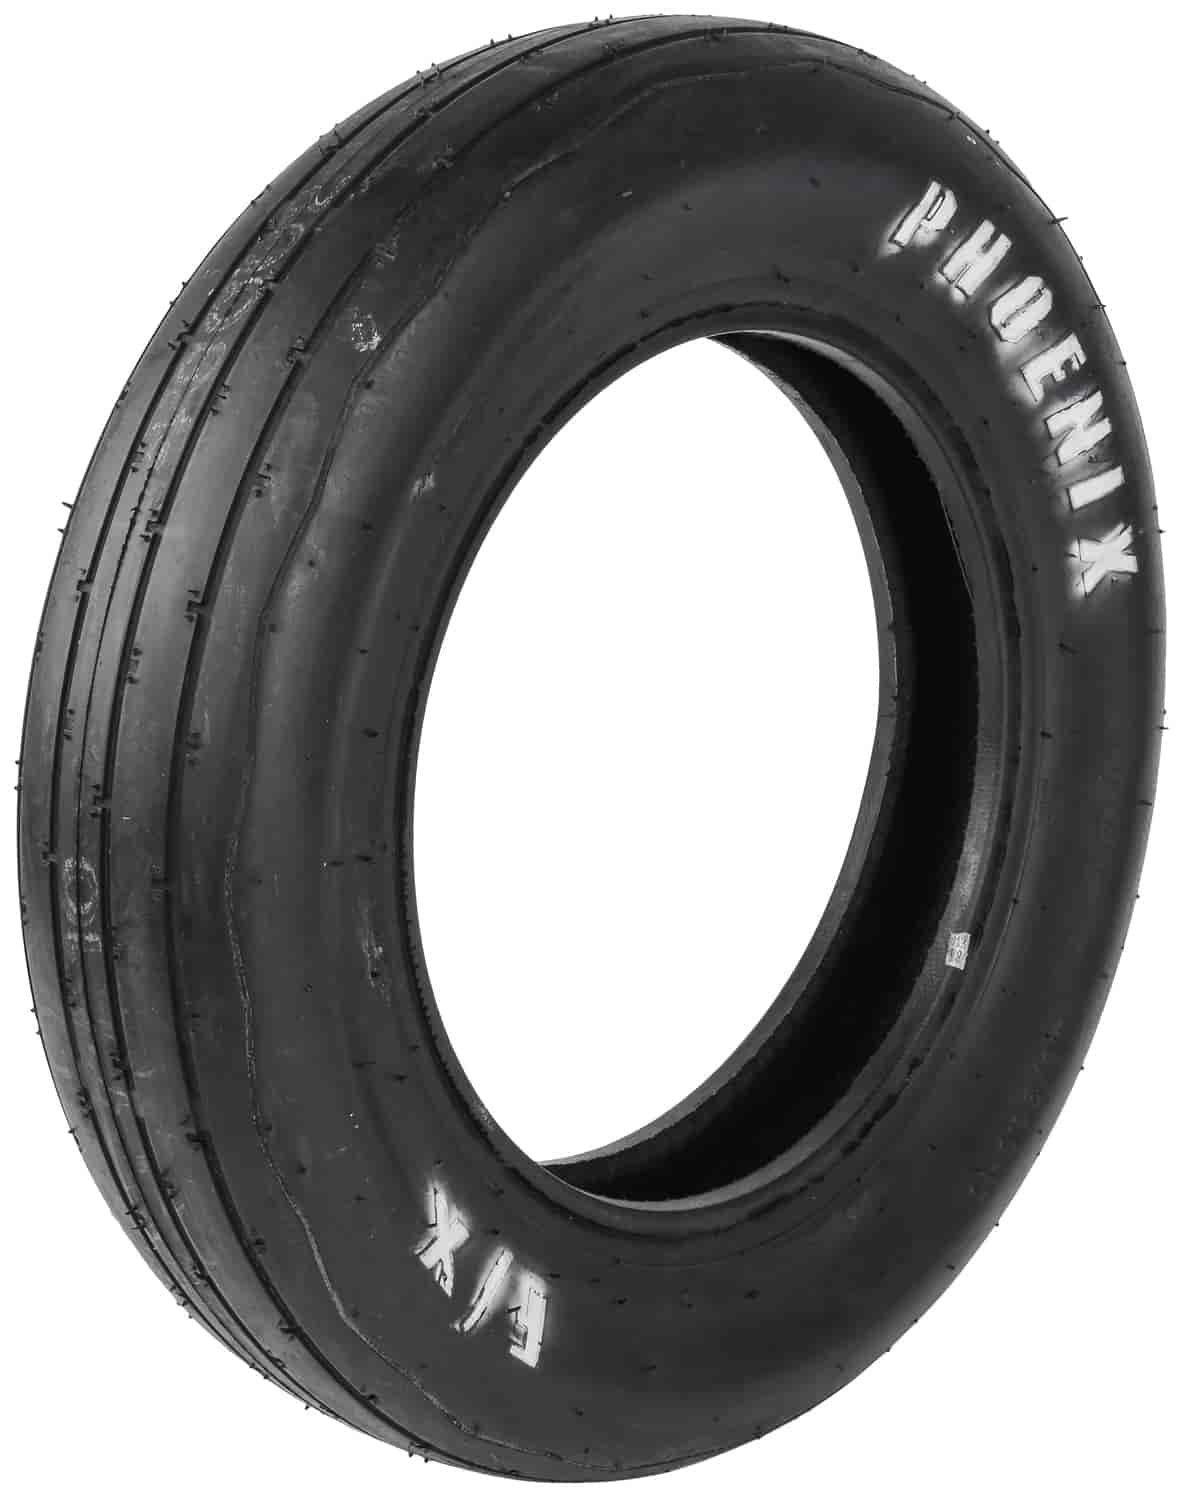 Front Drag Tire 24.5" x 4.5" - 15"